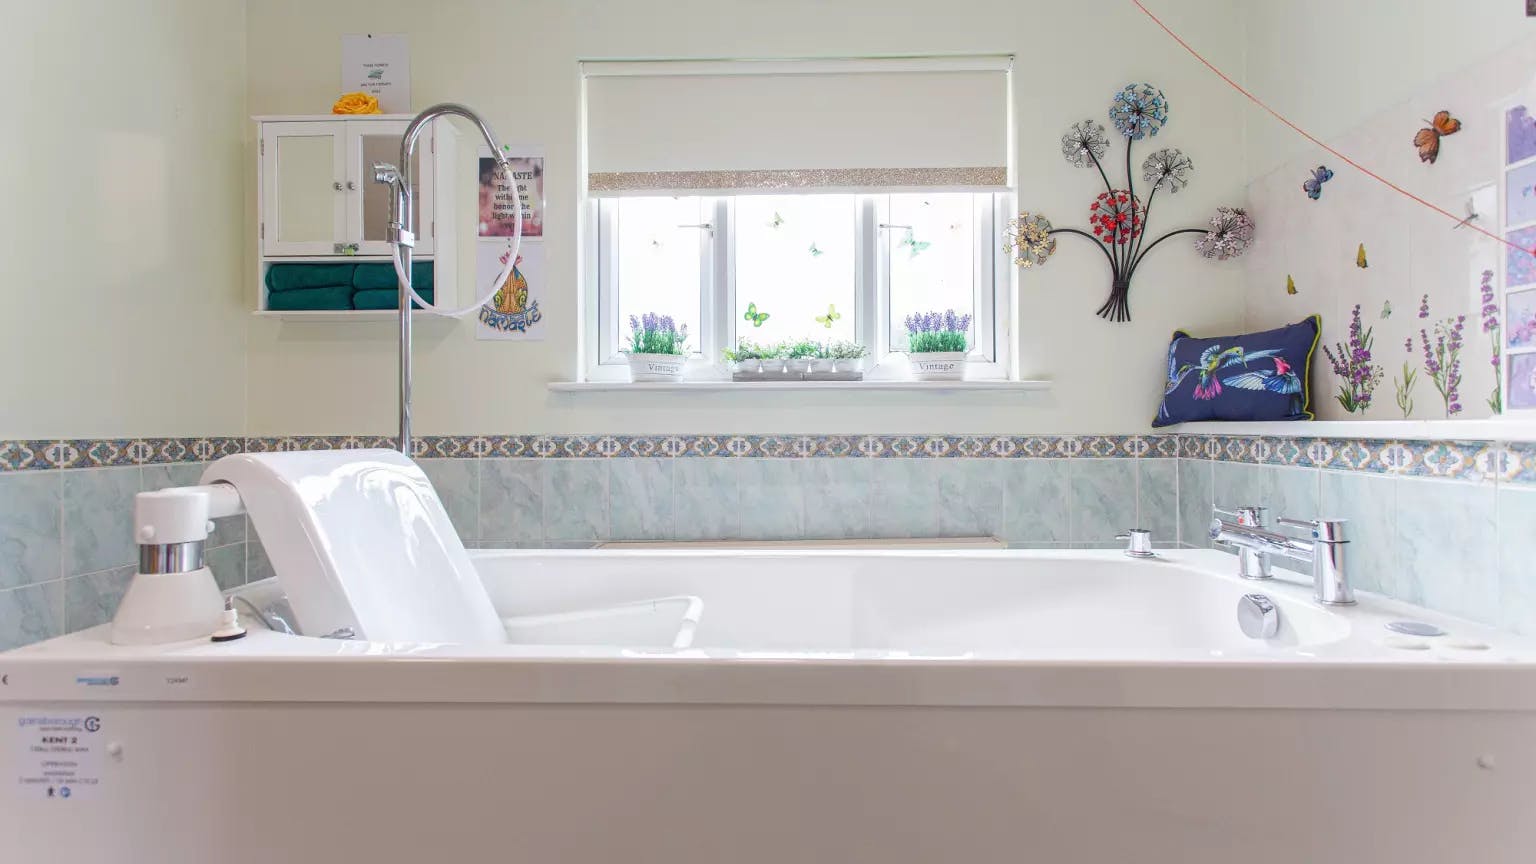 Bathroom of Willow Court care home in Harpenden, Hertfordshire